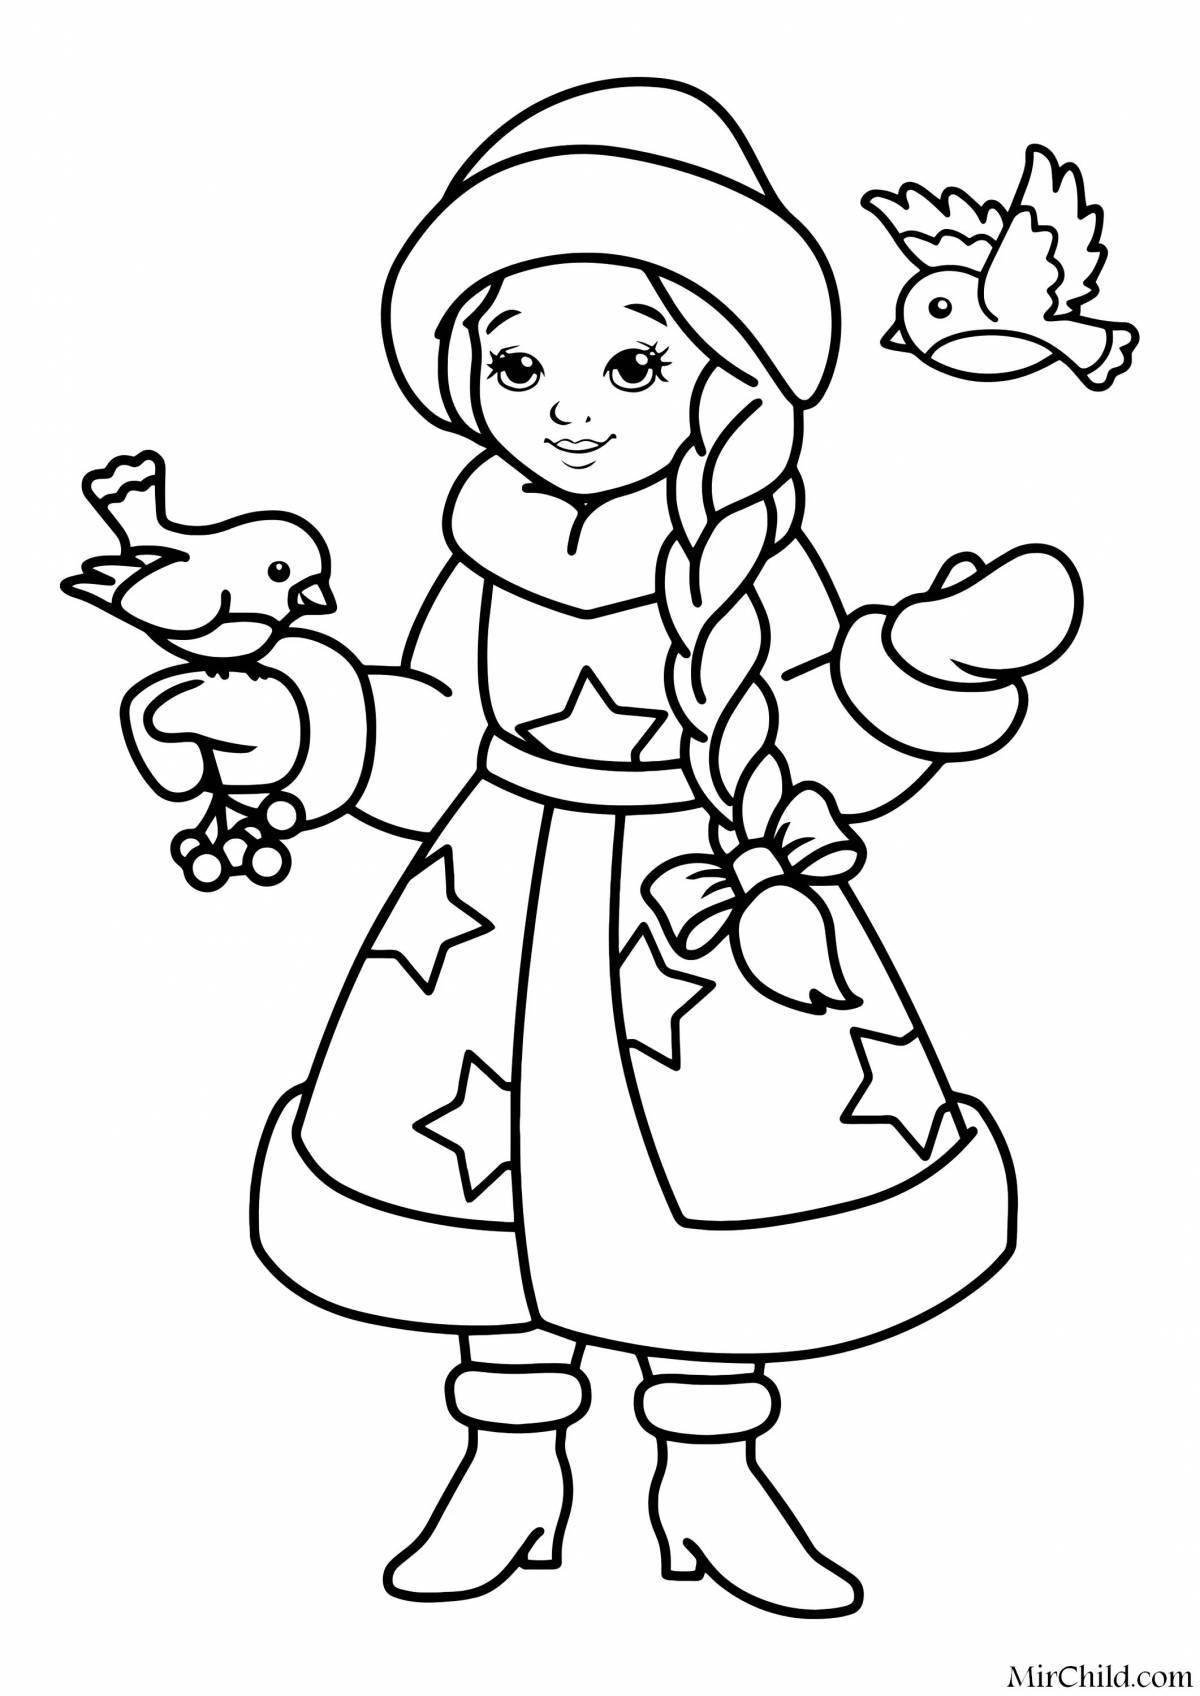 Coloring book gorgeous New Year's Snow Maiden